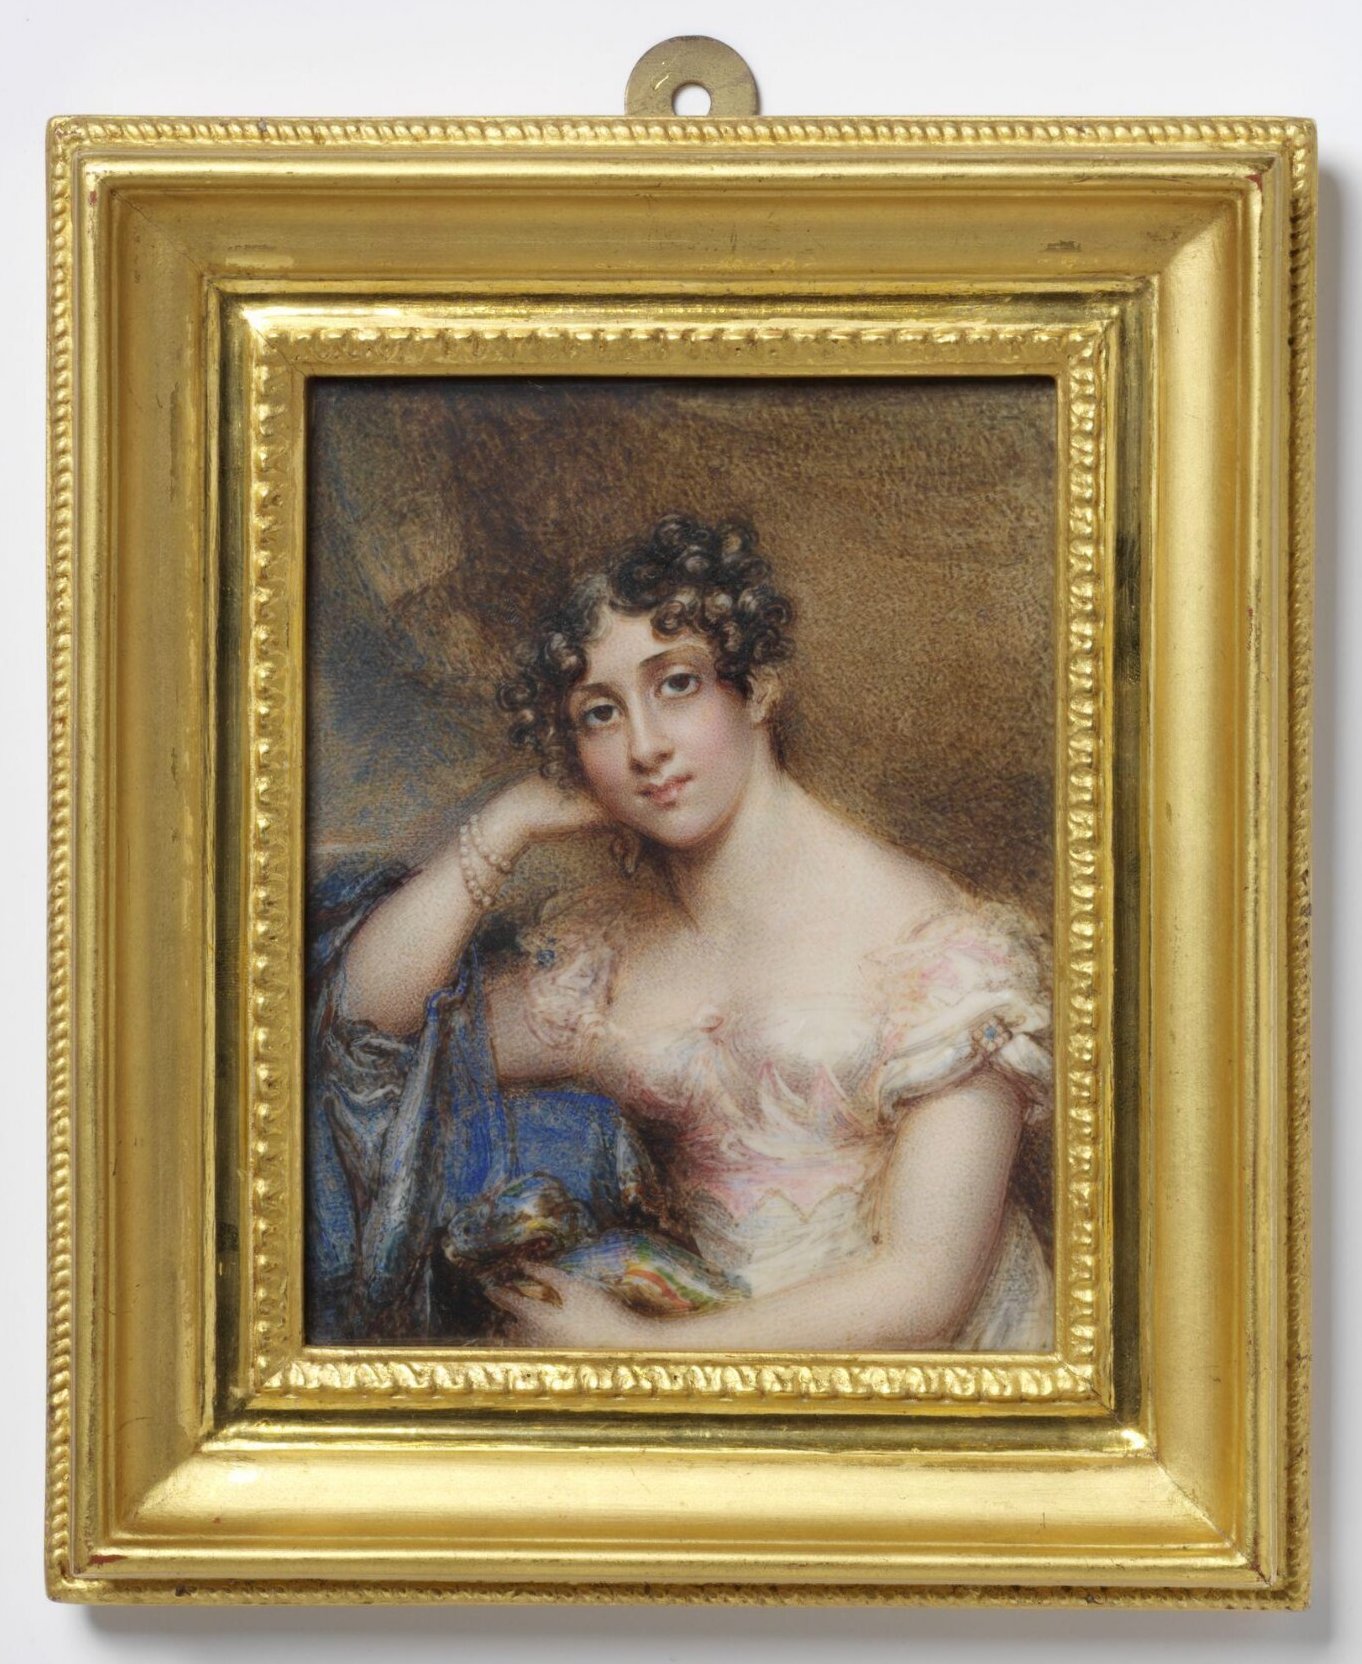 A half-length, rectangular portrait miniature of a young woman looking directly out at the viewer. She holds her head in one hand, with her elbow propped on a table covered in blue cloth. She wears two pearl bracelets and a pink gown, with her hair parted down the middle and her curls pulled up around her face.